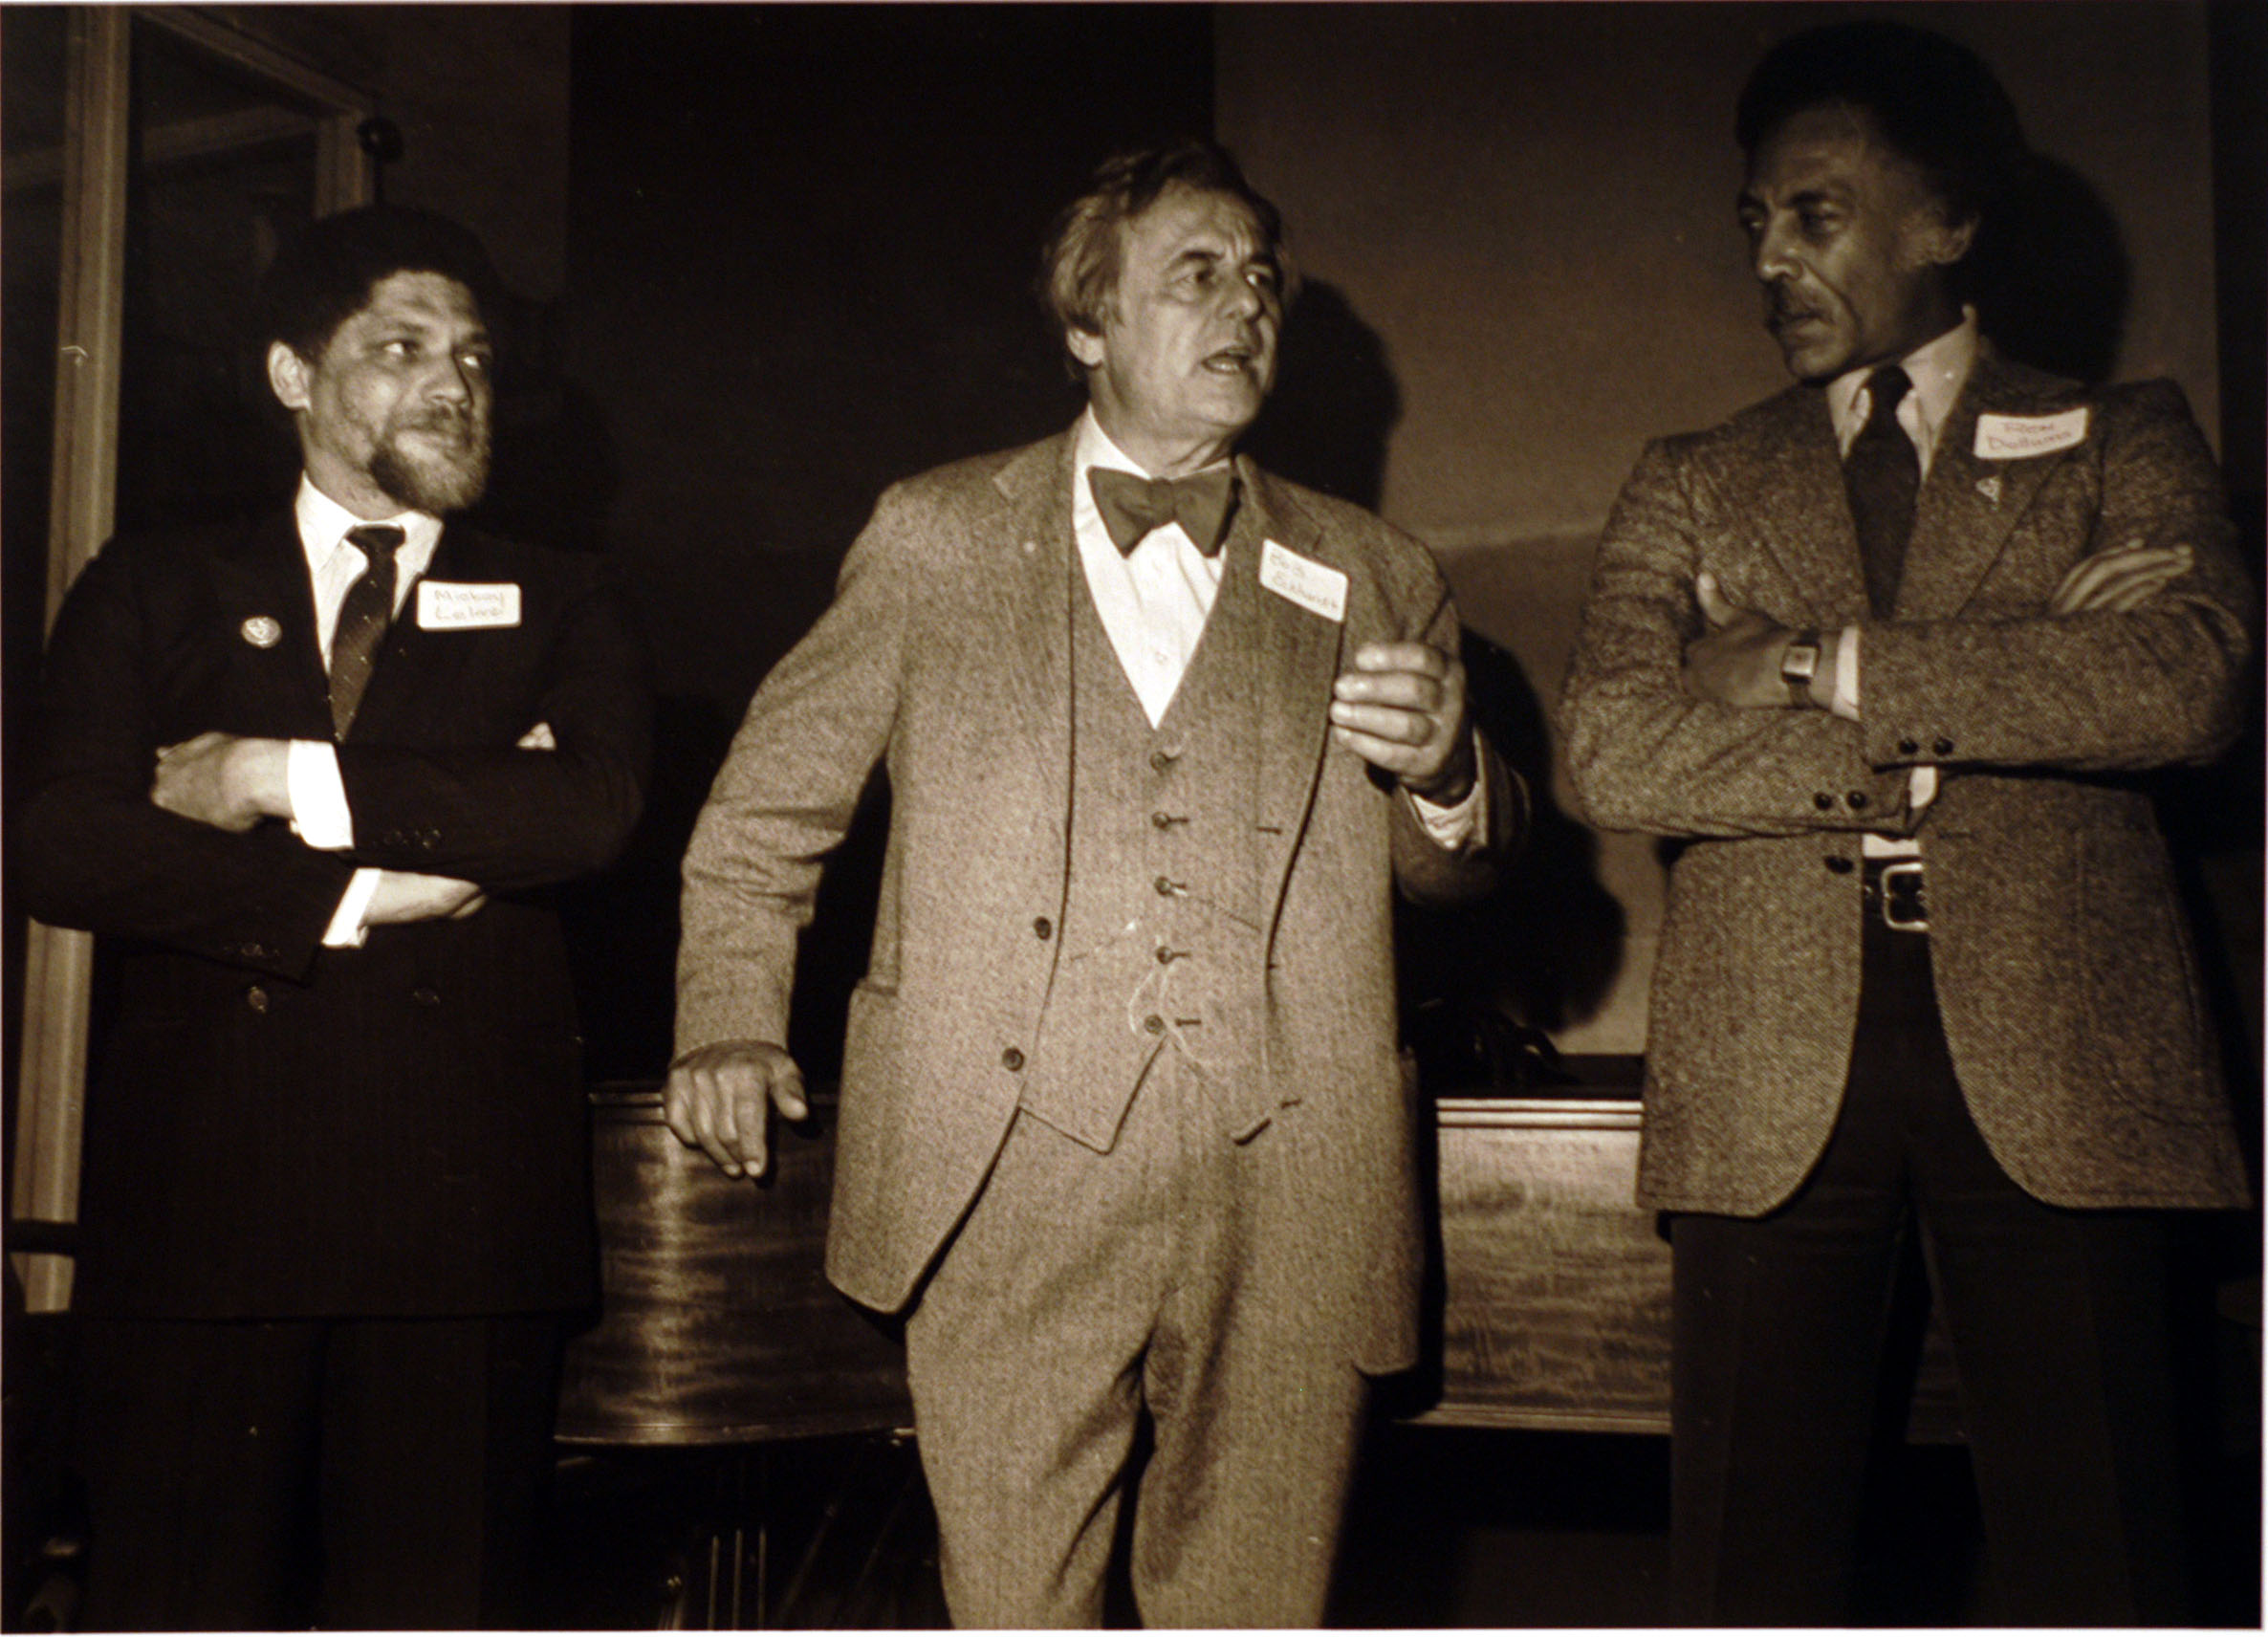 Appearing at a fundraiser with Congressmen Leland and Dellums (D- Appearing at Fundraiser with Congressmen Leland and Dellums (D- Appearing at Fundraiser with Congressmen Leland and Dellums